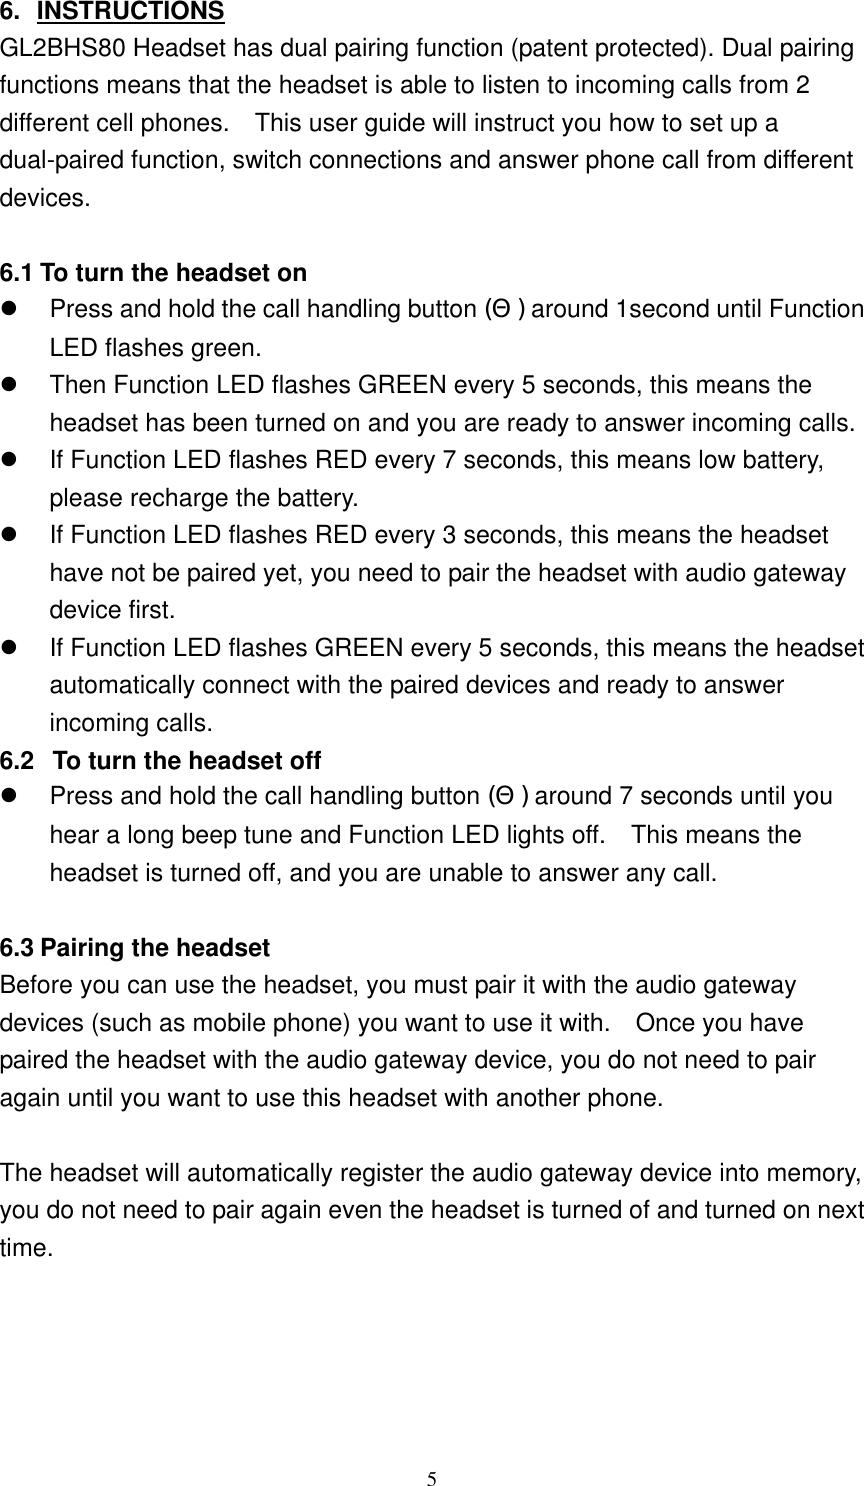 6. INSTRUCTIONS GL2BHS80 Headset has dual pairing function (patent protected). Dual pairing functions means that the headset is able to listen to incoming calls from 2 different cell phones.    This user guide will instruct you how to set up a dual-paired function, switch connections and answer phone call from different devices.  6.1 To turn the headset on   Press and hold the call handling button (Θ) around 1second until Function LED flashes green.   Then Function LED flashes GREEN every 5 seconds, this means the headset has been turned on and you are ready to answer incoming calls.   If Function LED flashes RED every 7 seconds, this means low battery, please recharge the battery.   If Function LED flashes RED every 3 seconds, this means the headset have not be paired yet, you need to pair the headset with audio gateway device first.   If Function LED flashes GREEN every 5 seconds, this means the headset automatically connect with the paired devices and ready to answer incoming calls.   6.2   To turn the headset off   Press and hold the call handling button (Θ) around 7 seconds until you hear a long beep tune and Function LED lights off.    This means the headset is turned off, and you are unable to answer any call.      6.3 Pairing the headset Before you can use the headset, you must pair it with the audio gateway devices (such as mobile phone) you want to use it with.    Once you have paired the headset with the audio gateway device, you do not need to pair again until you want to use this headset with another phone.    The headset will automatically register the audio gateway device into memory, you do not need to pair again even the headset is turned of and turned on next time.      5